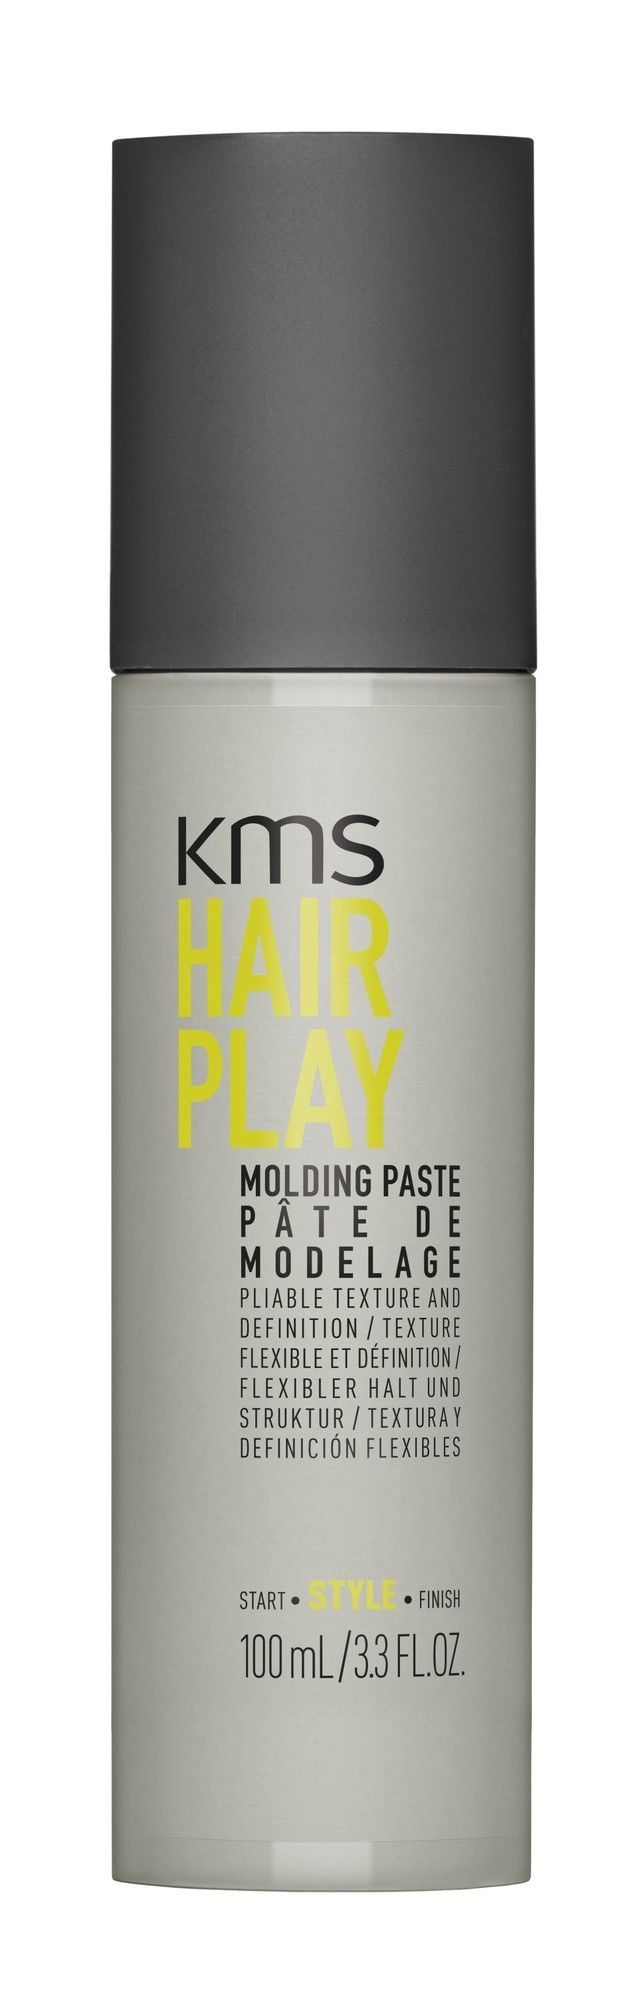 KMS - Hair Play - Molding Paste - 100 ml